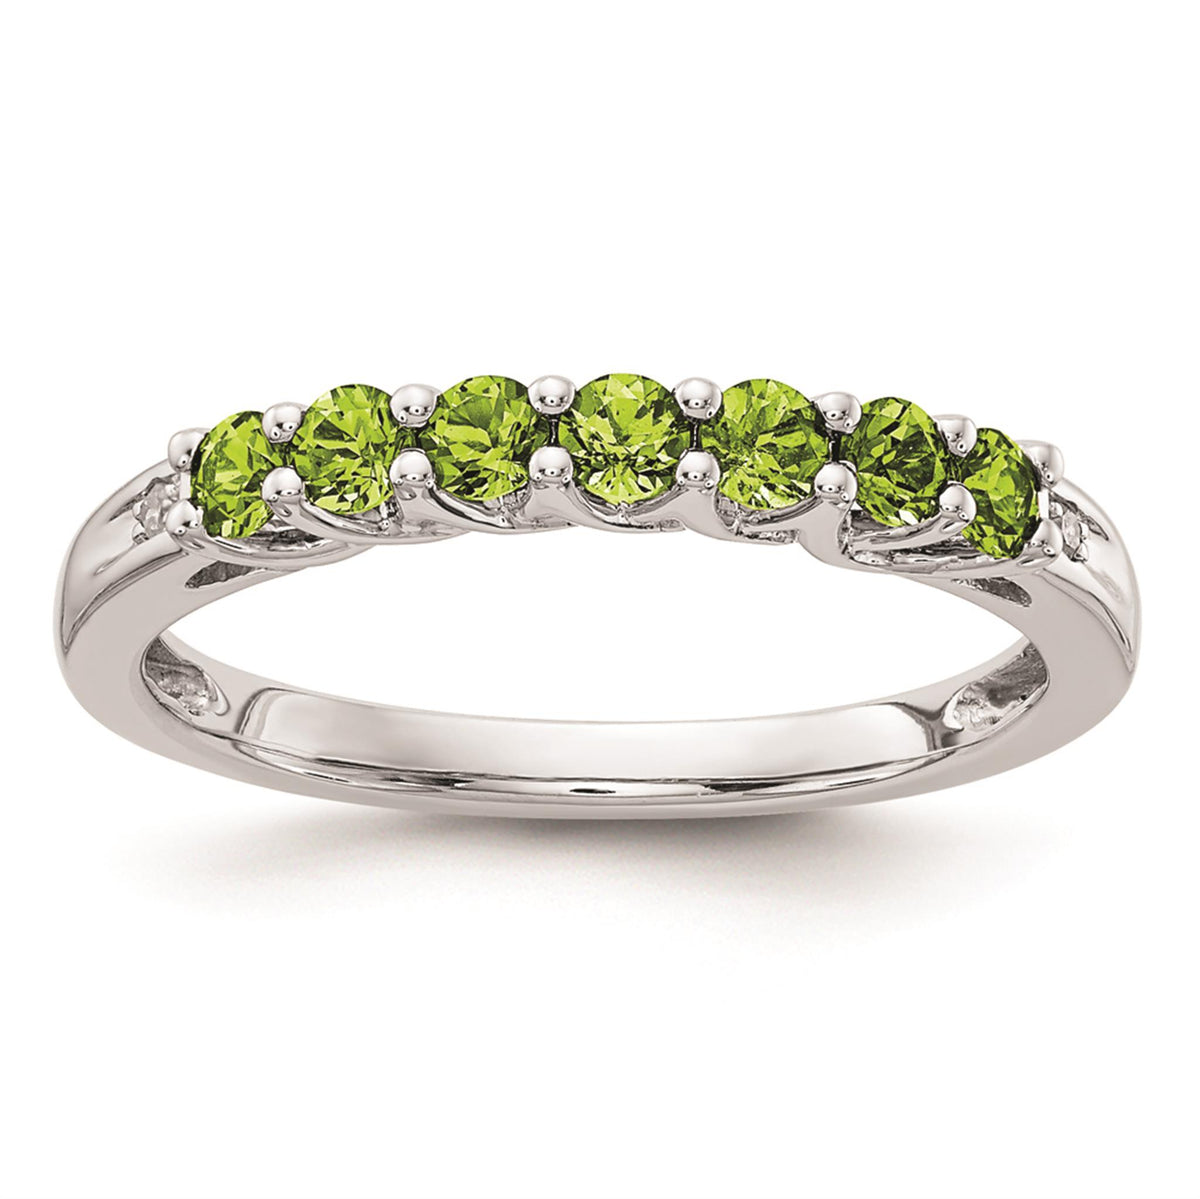 10Kt White Gold Stackable Ring With 2.5mm Peridot